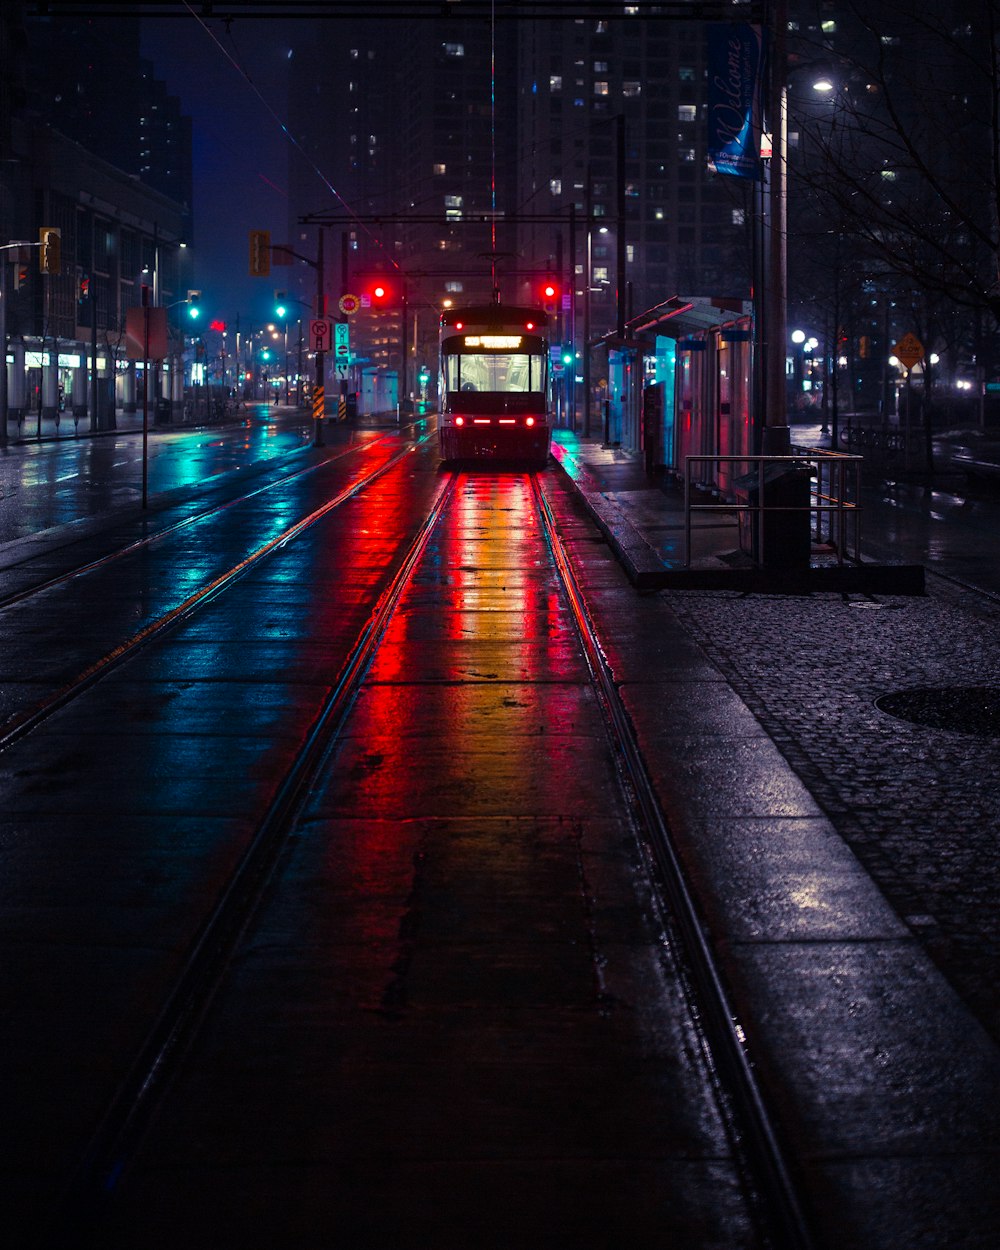 photo of tram beside waiting station during nighttime